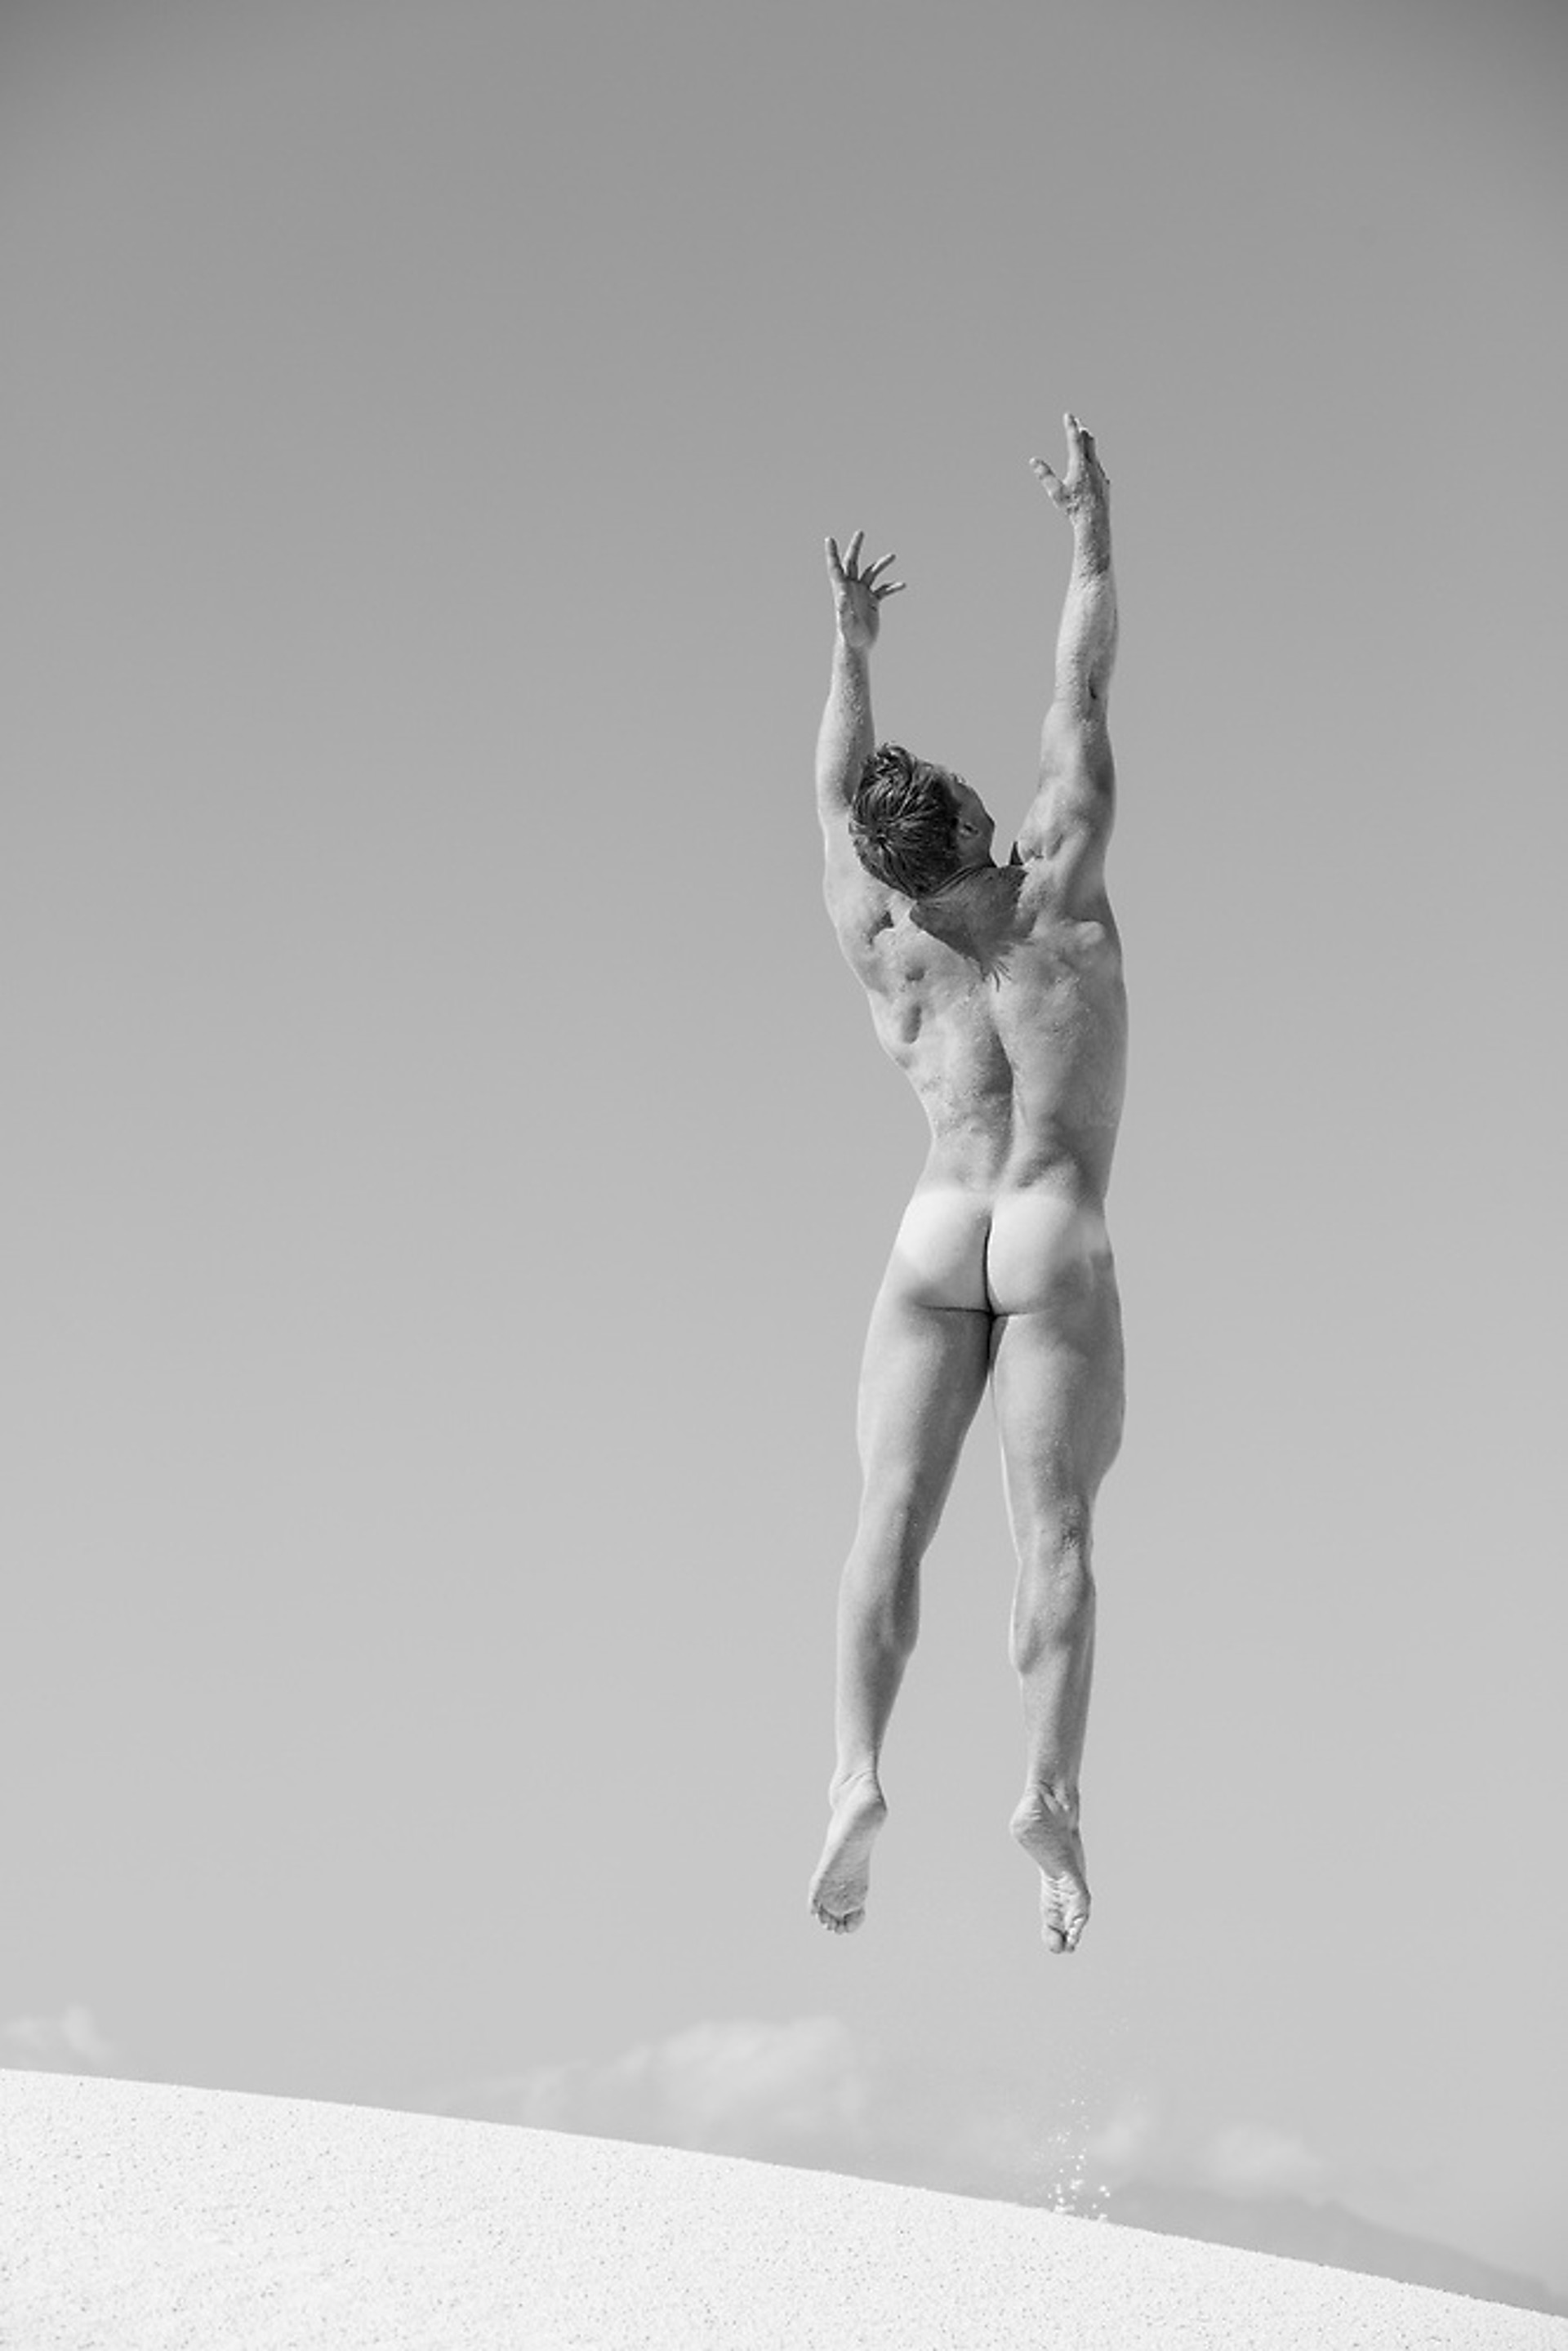 Male Nude Takes Flight by ROB LANG